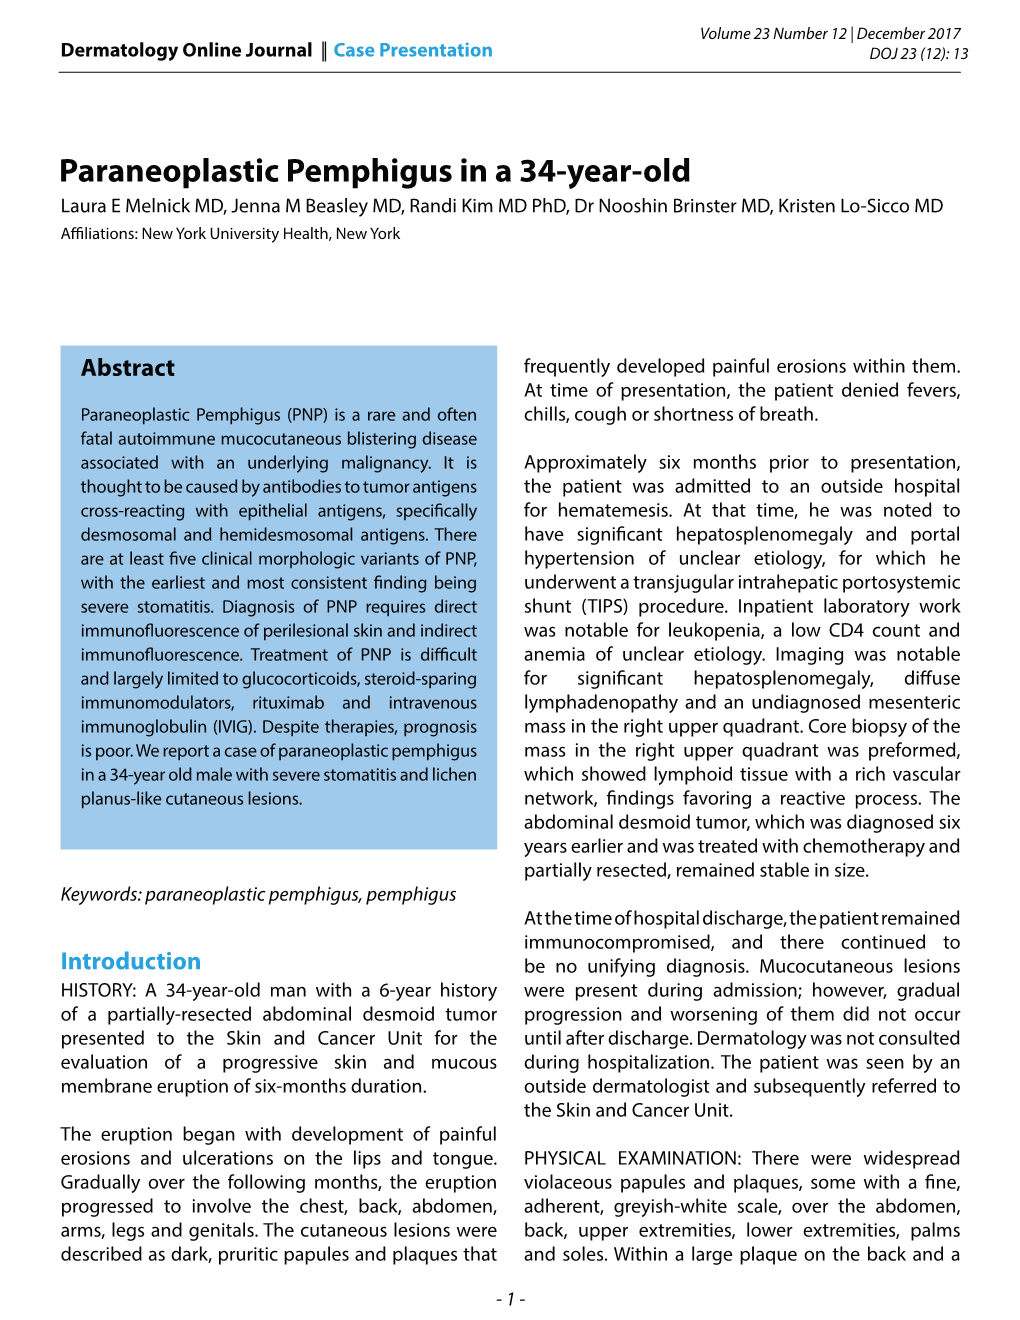 Paraneoplastic Pemphigus in a 34-Year-Old